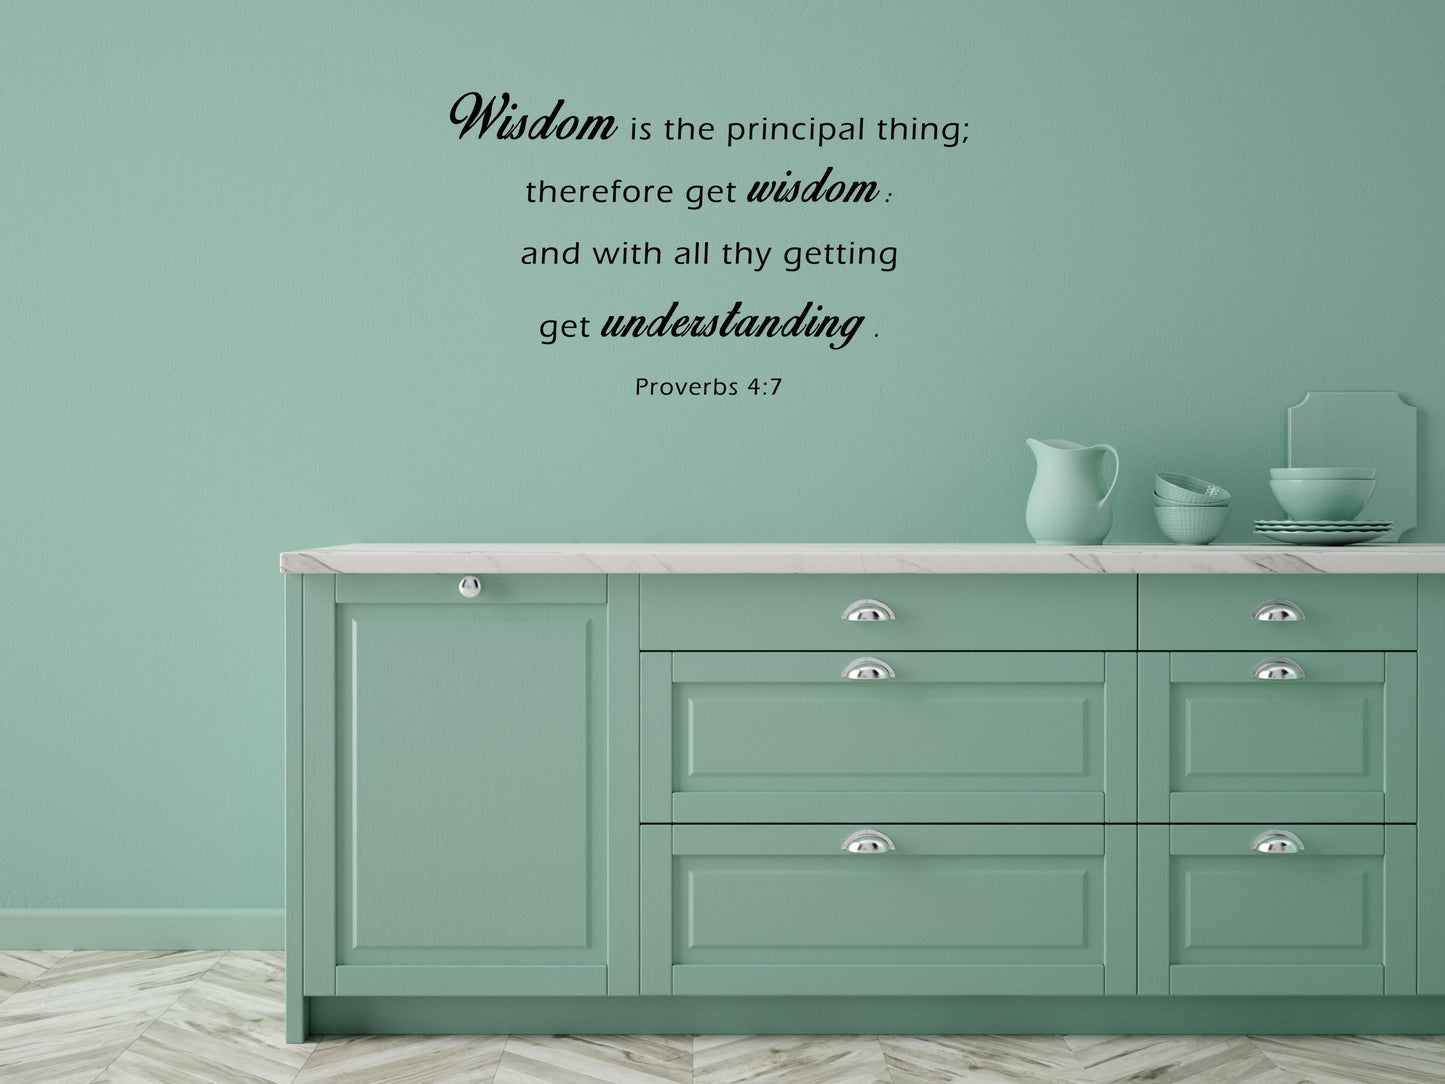 Proverbs 4:7 Wisdom is the principal thing - Inspirational Christian Bible Verse Scripture Wall Decal Church Quote Bible Sticker Vinyl Wall Decal Inspirational Wall Signs 